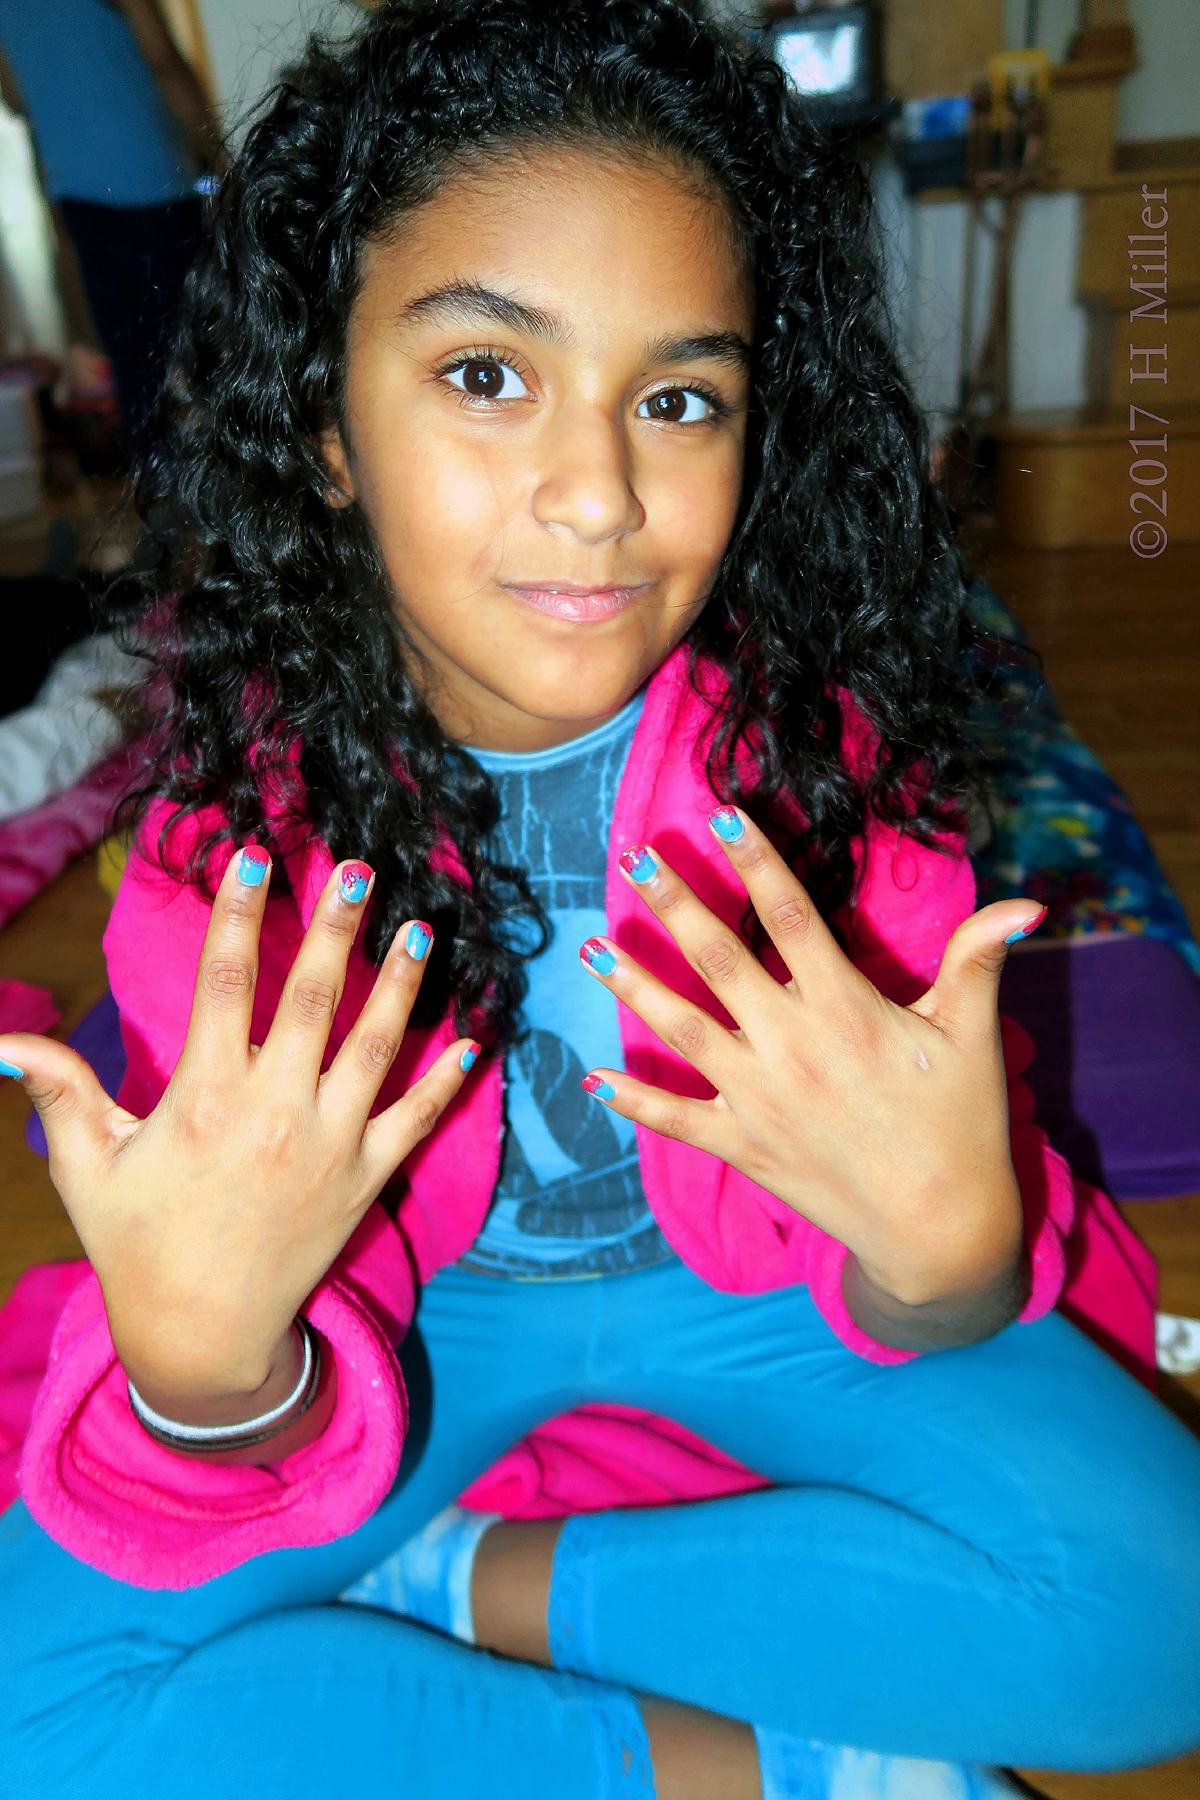 Check Out Her Awesome Mini Mani! 